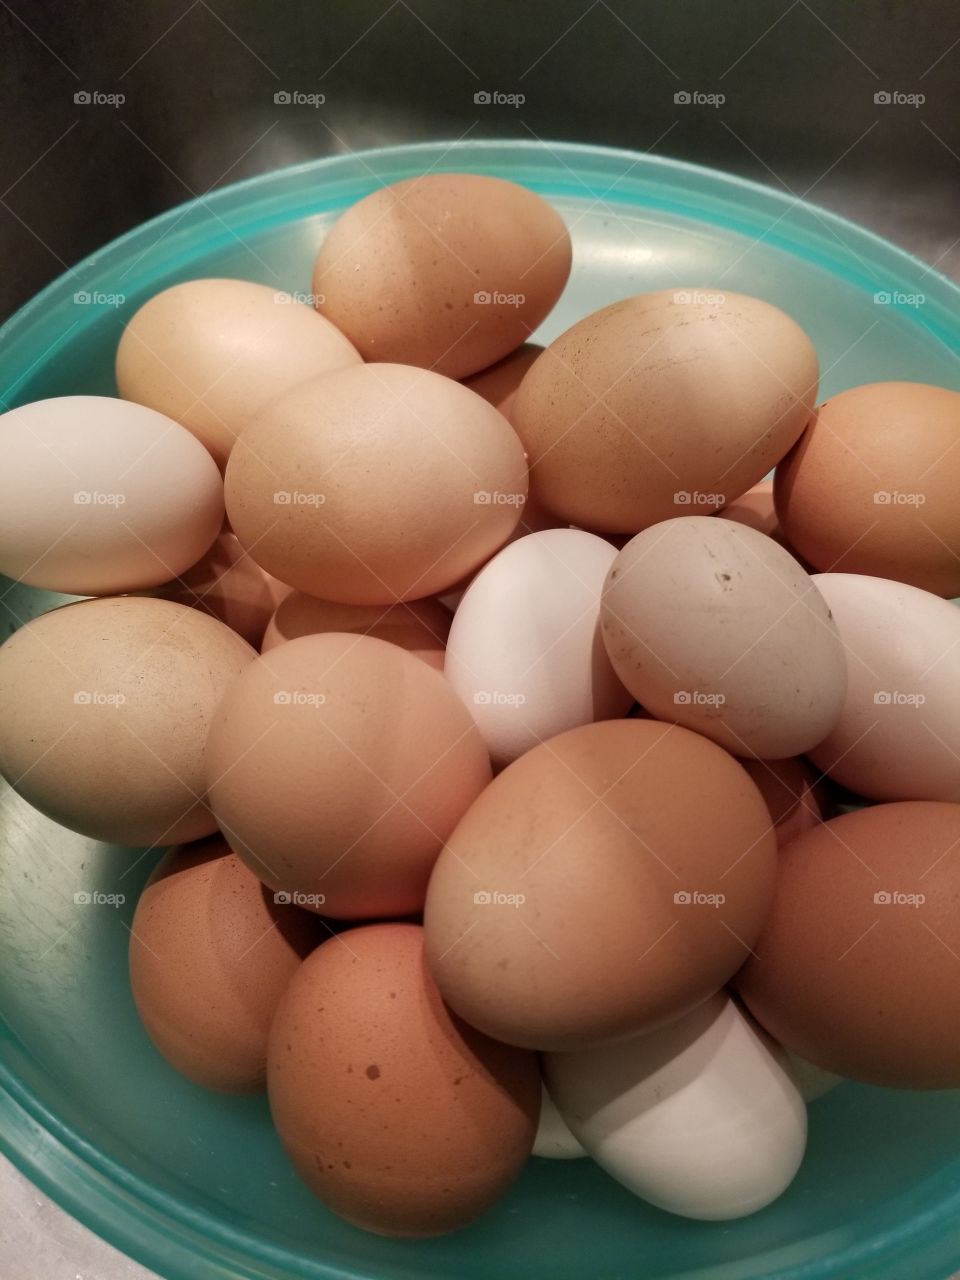 A giant bowl of eggs of all colors. Brown, cream and white eggs. Extra small, small, medium and large eggs. Bantam and ISA brown chicken offspring.